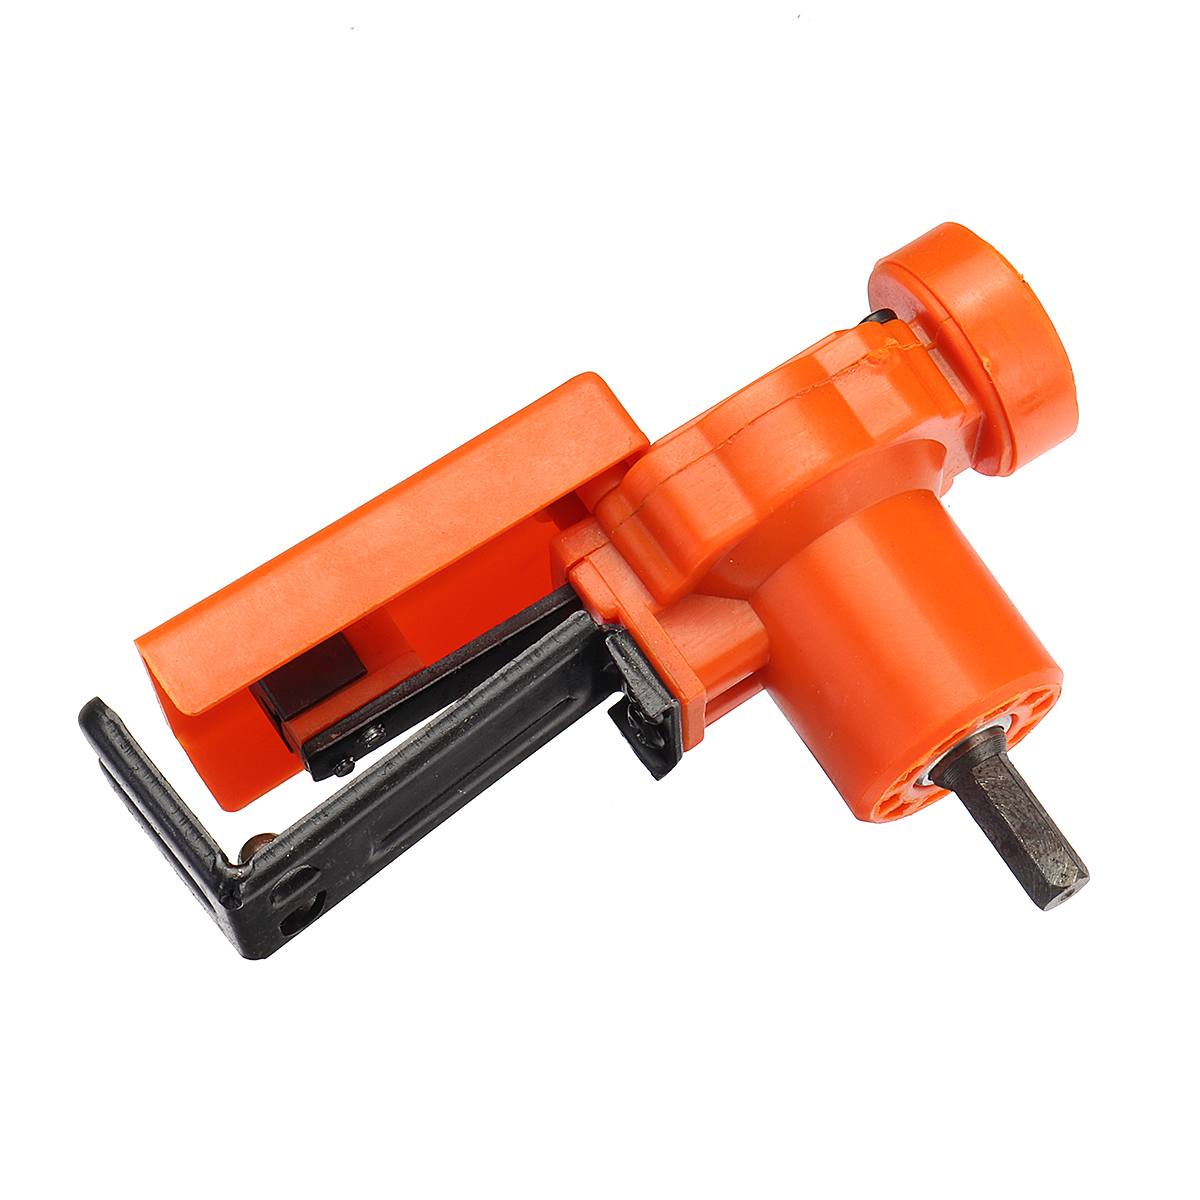 Reciprocating-Saw-Attachment-Adapter-Metal-Cutting-Tools-Electric-Drill-Attachment-2-Blades-1722798-6